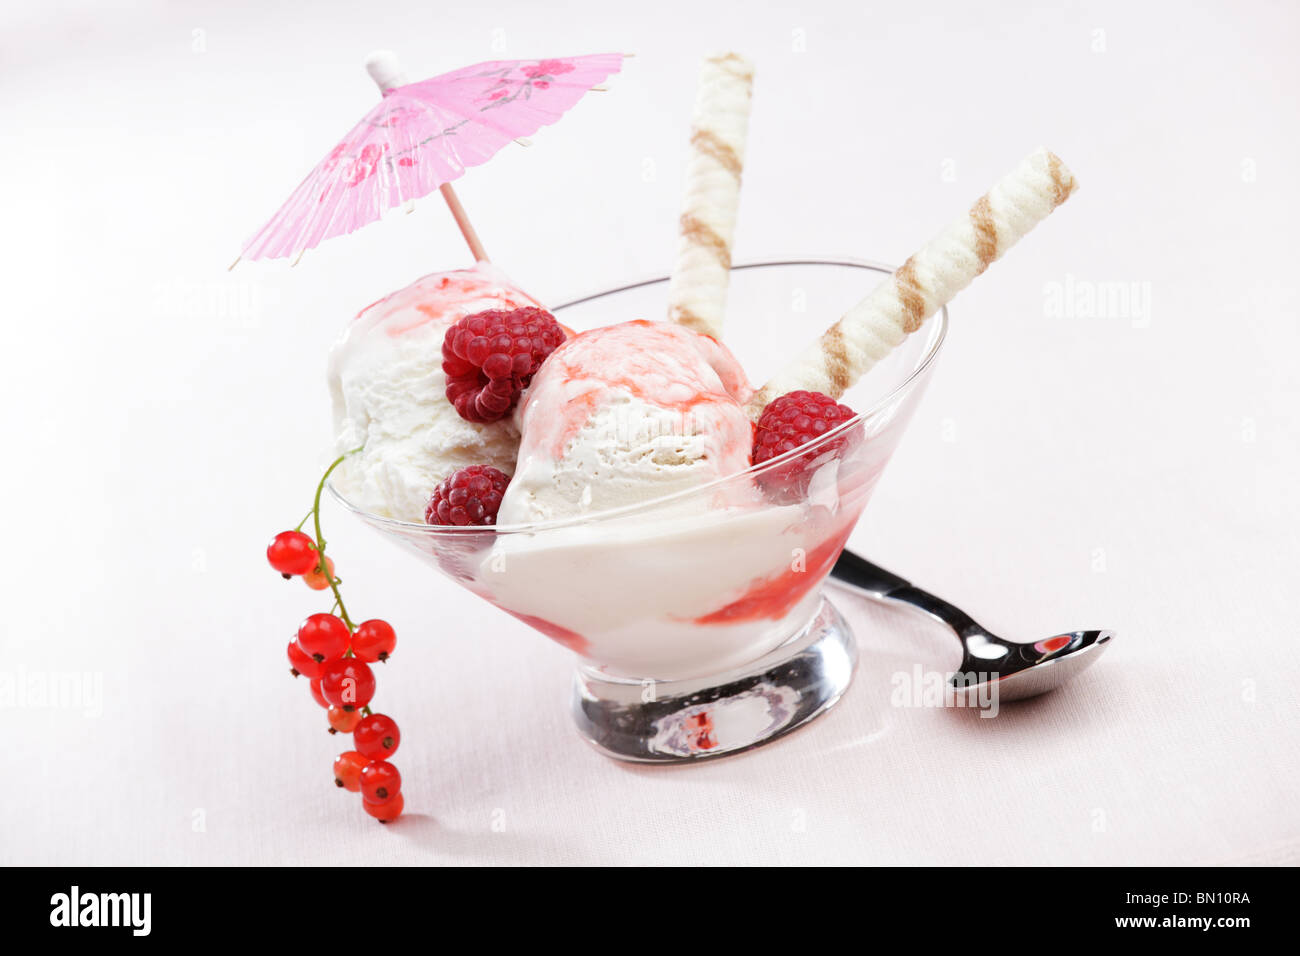 Ice cream with raspberry, red currant, wafer sticks, and umbrella Stock Photo